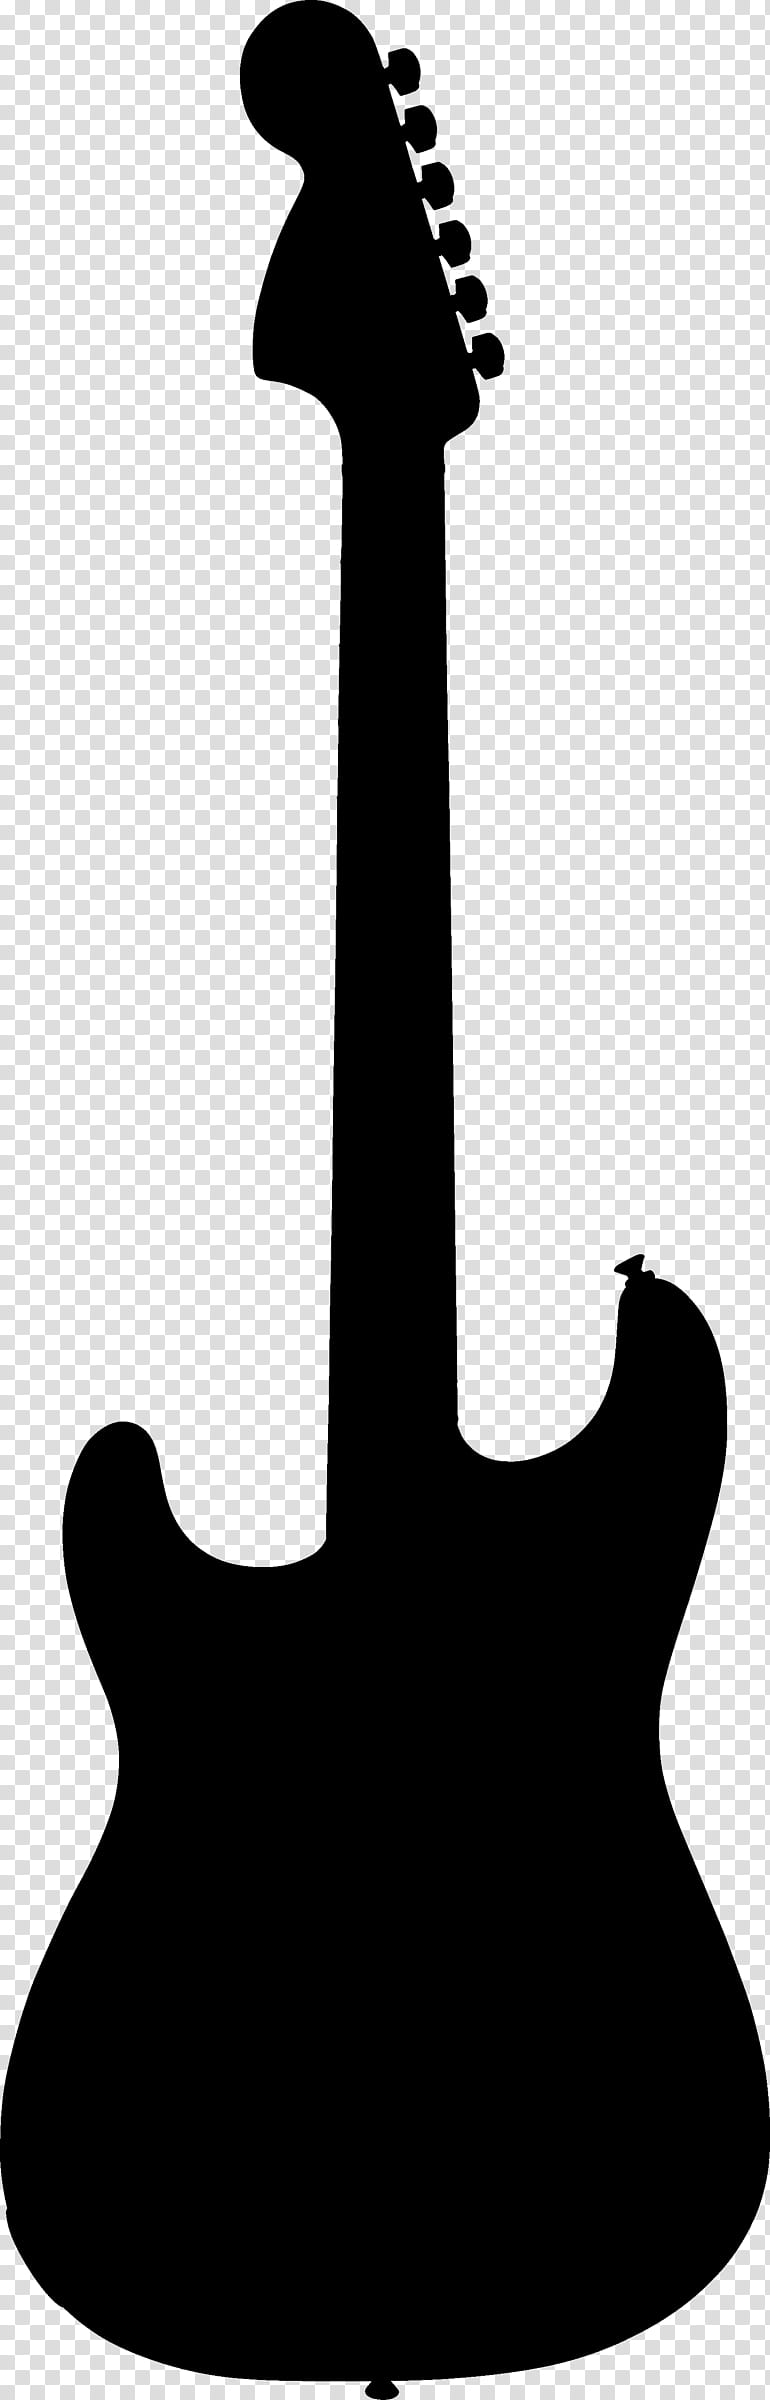 Guitar, Electric Guitar, Silhouette, Bass Guitar, Drawing, Lead Guitar, String Instruments, Electricity transparent background PNG clipart